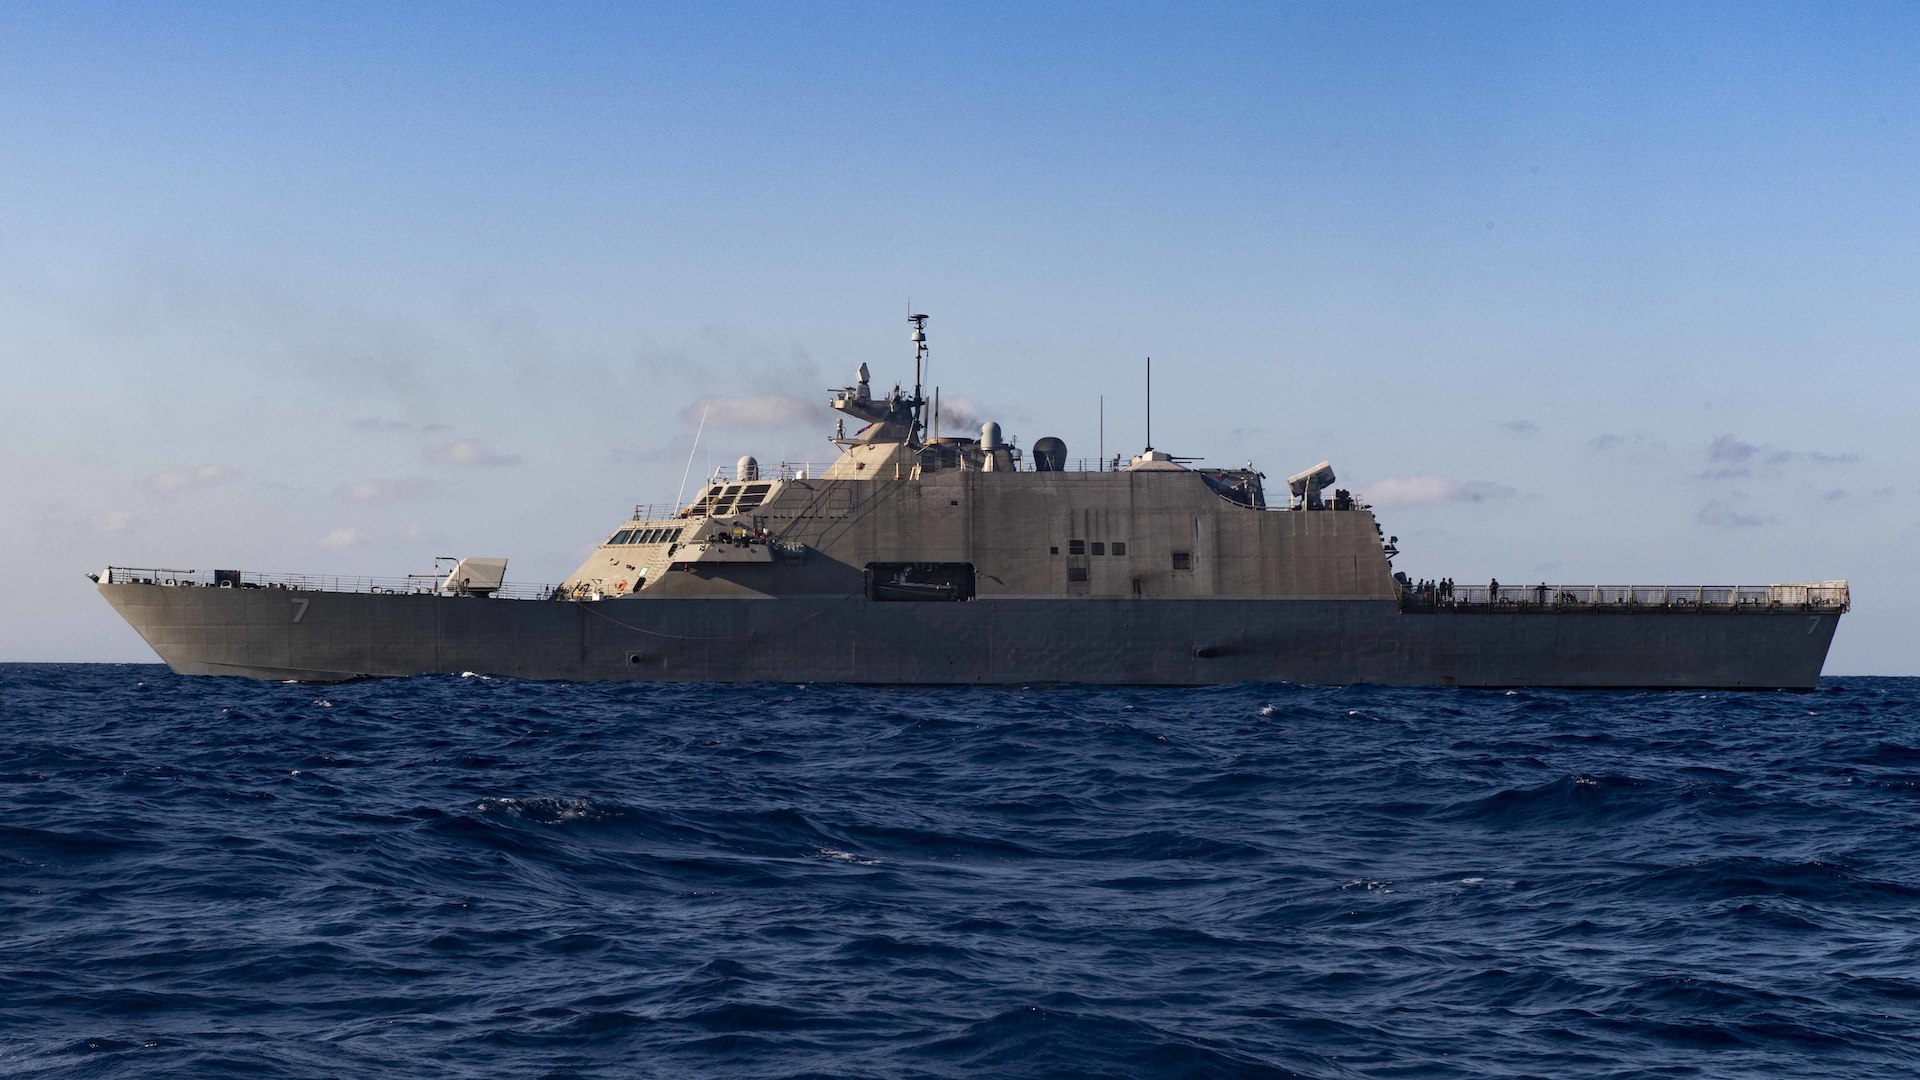 The Freedom-class littoral combat ship USS Detroit (LCS 7) sails through the Caribbean Sea. During the deployment to the U.S. Southern Command's area of responsibility, Detroit, with embarked helicopter and USCG law enforcement detachment, will support Joint Interagency Task Force South's mission, which includes counter-illicit drug trafficking in the Caribbean and Eastern Pacific. (U.S. Navy photo by Mass Communication Specialist 2nd Class Anderson W. Branch/Released)